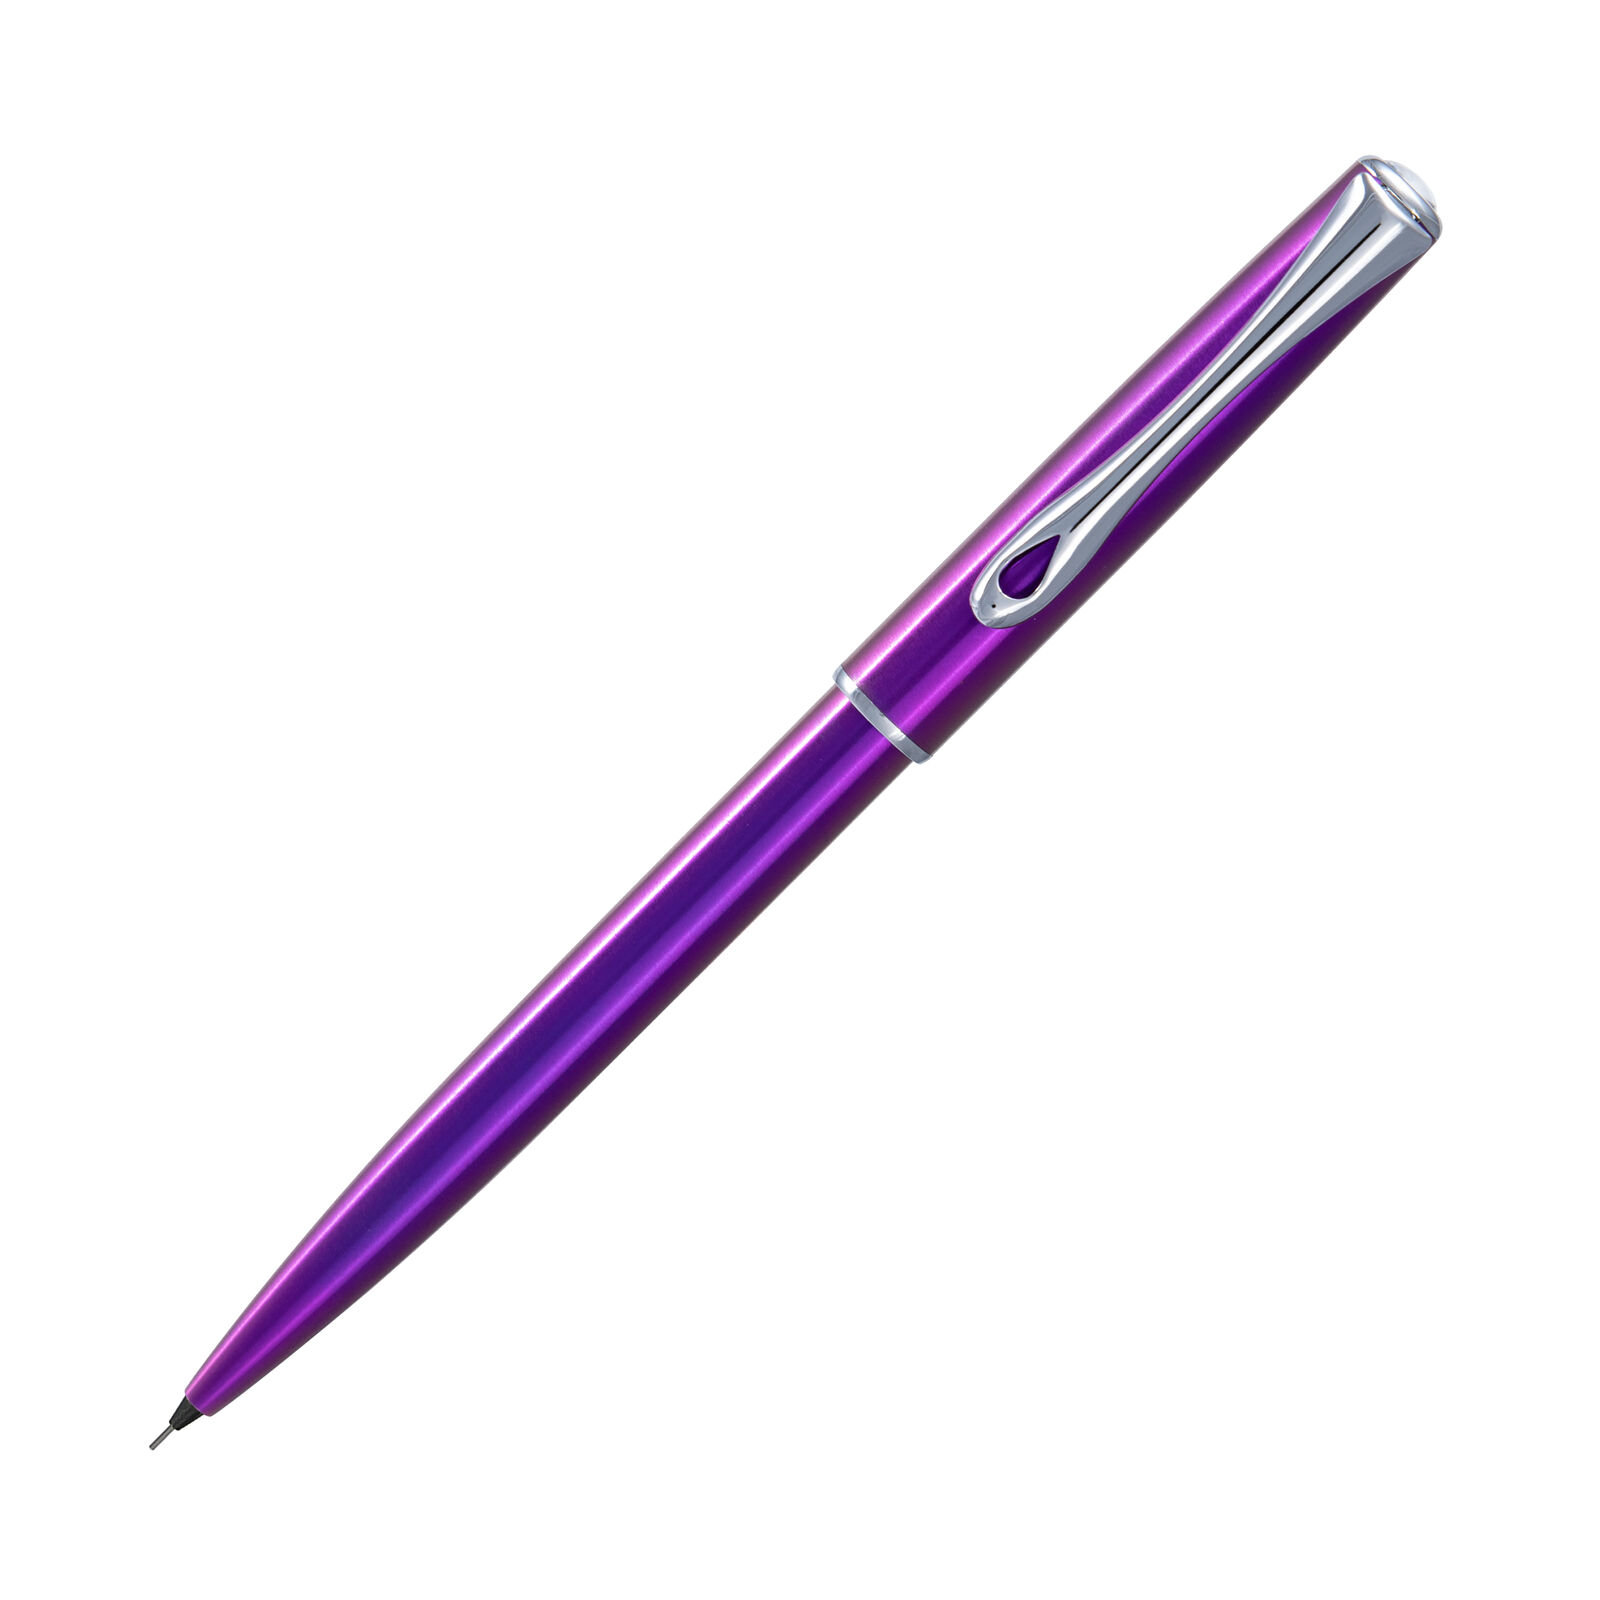 Diplomat Traveller Mechanical Pencil in Funky Fuchsia - 0.5mm - NEW in Box